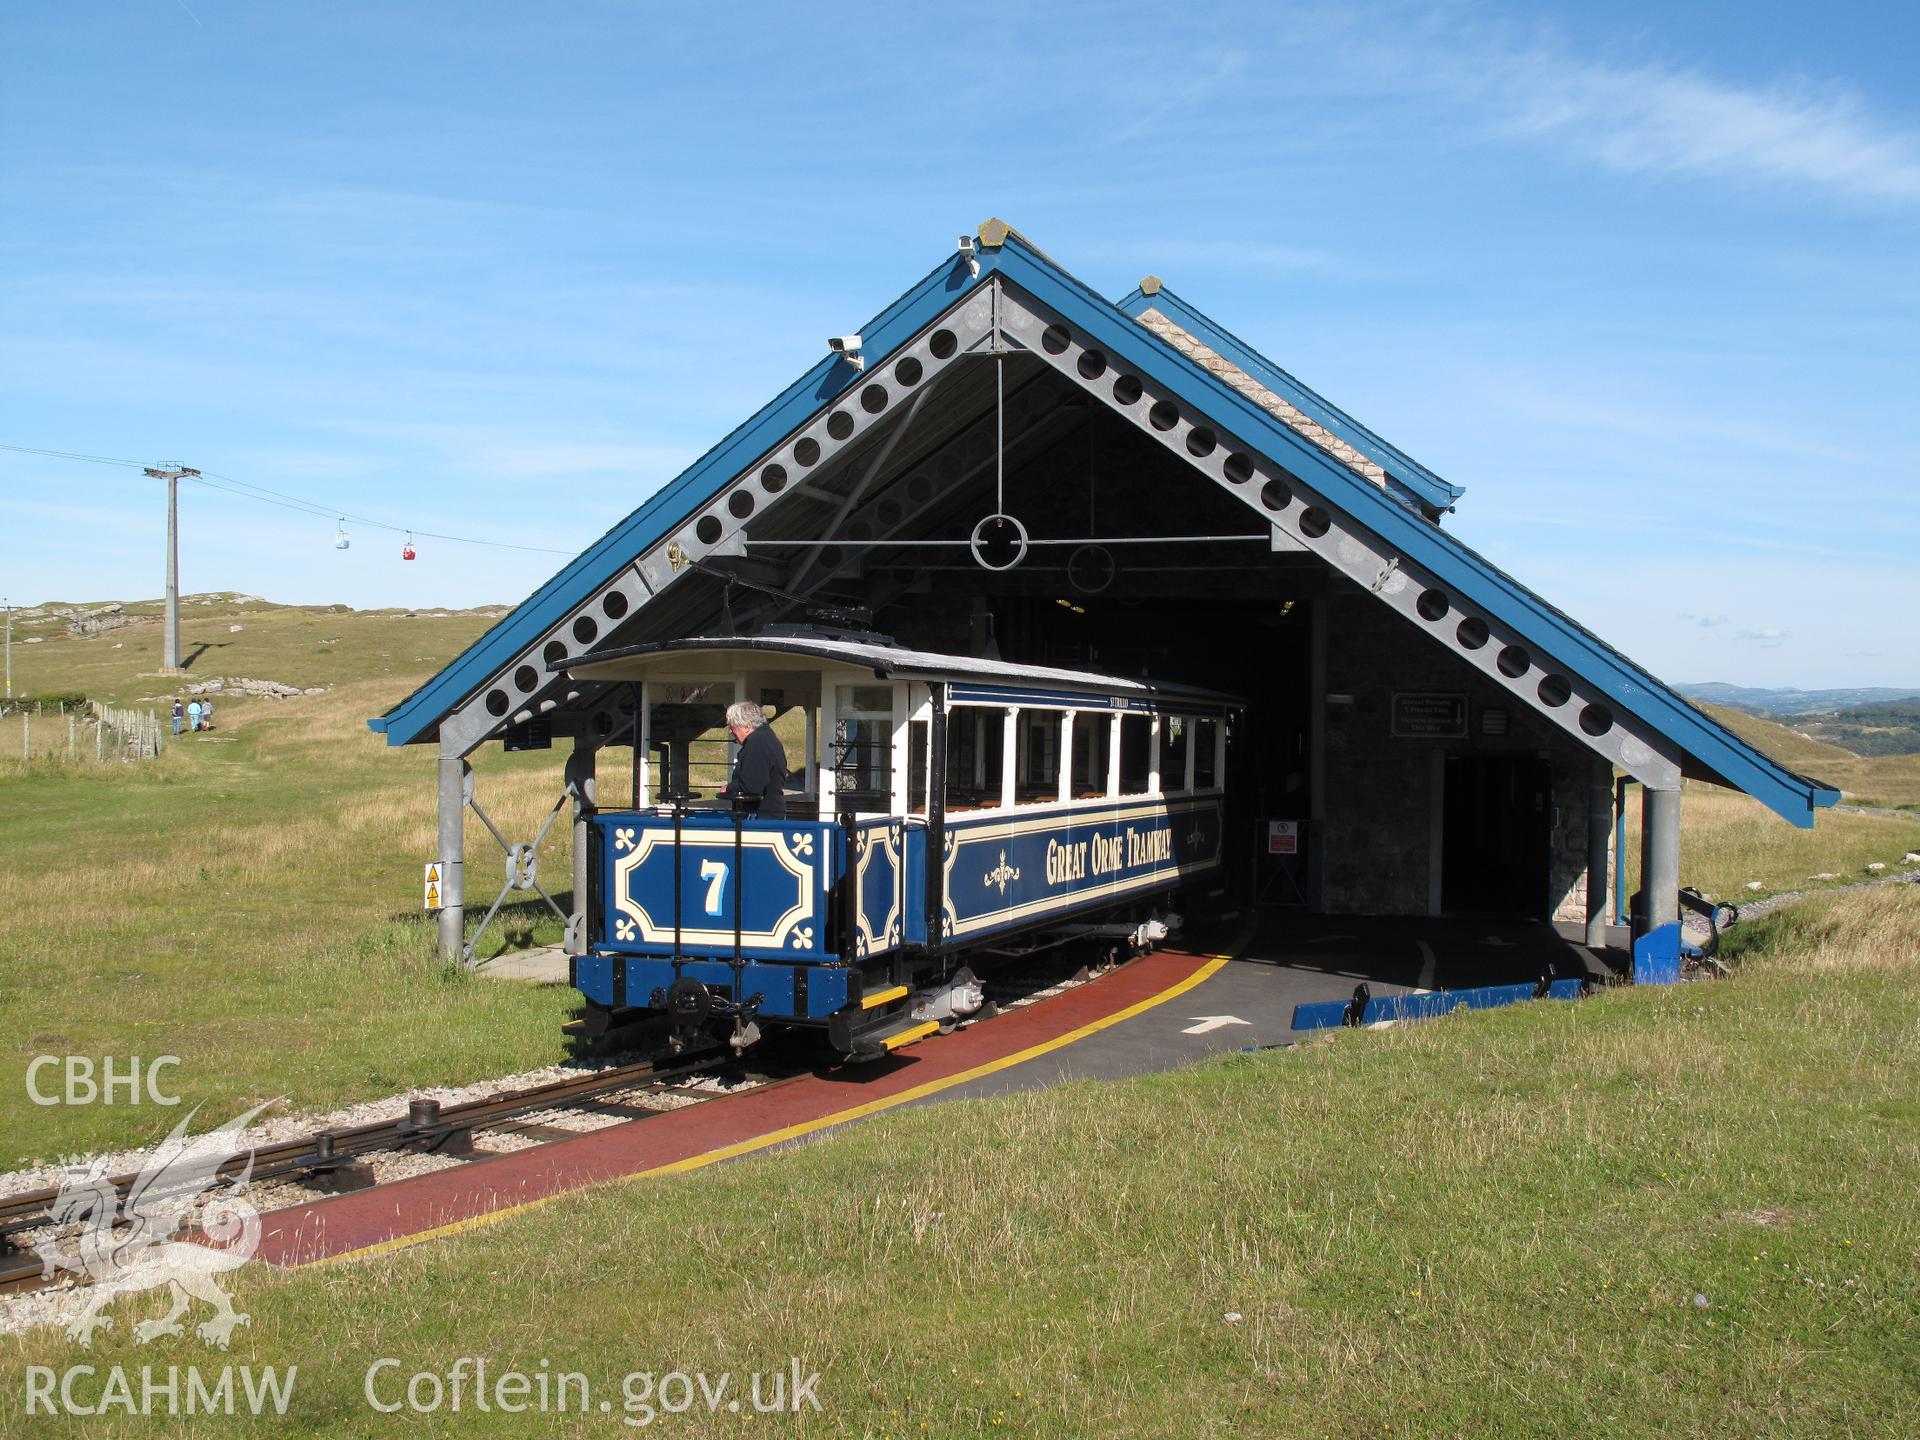 West (upper) end of Halfway Station, Great Orme Tramway, Llandudno, taken by Brian Malaws on 23 July 2011.